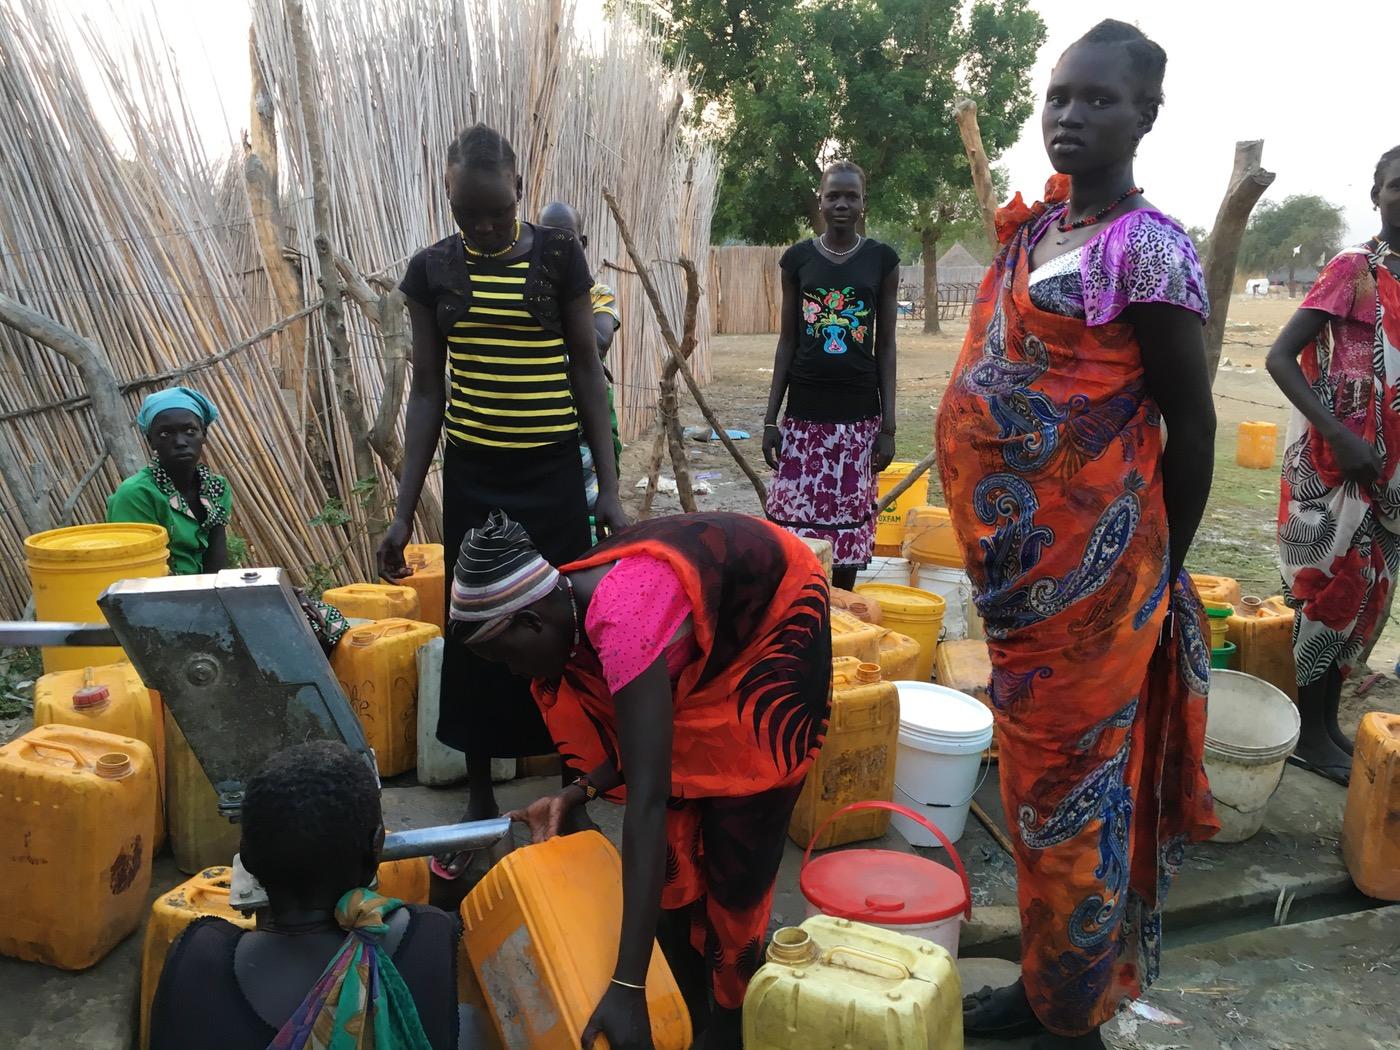 Women in Ganyiel stand in line waiting to pump water.